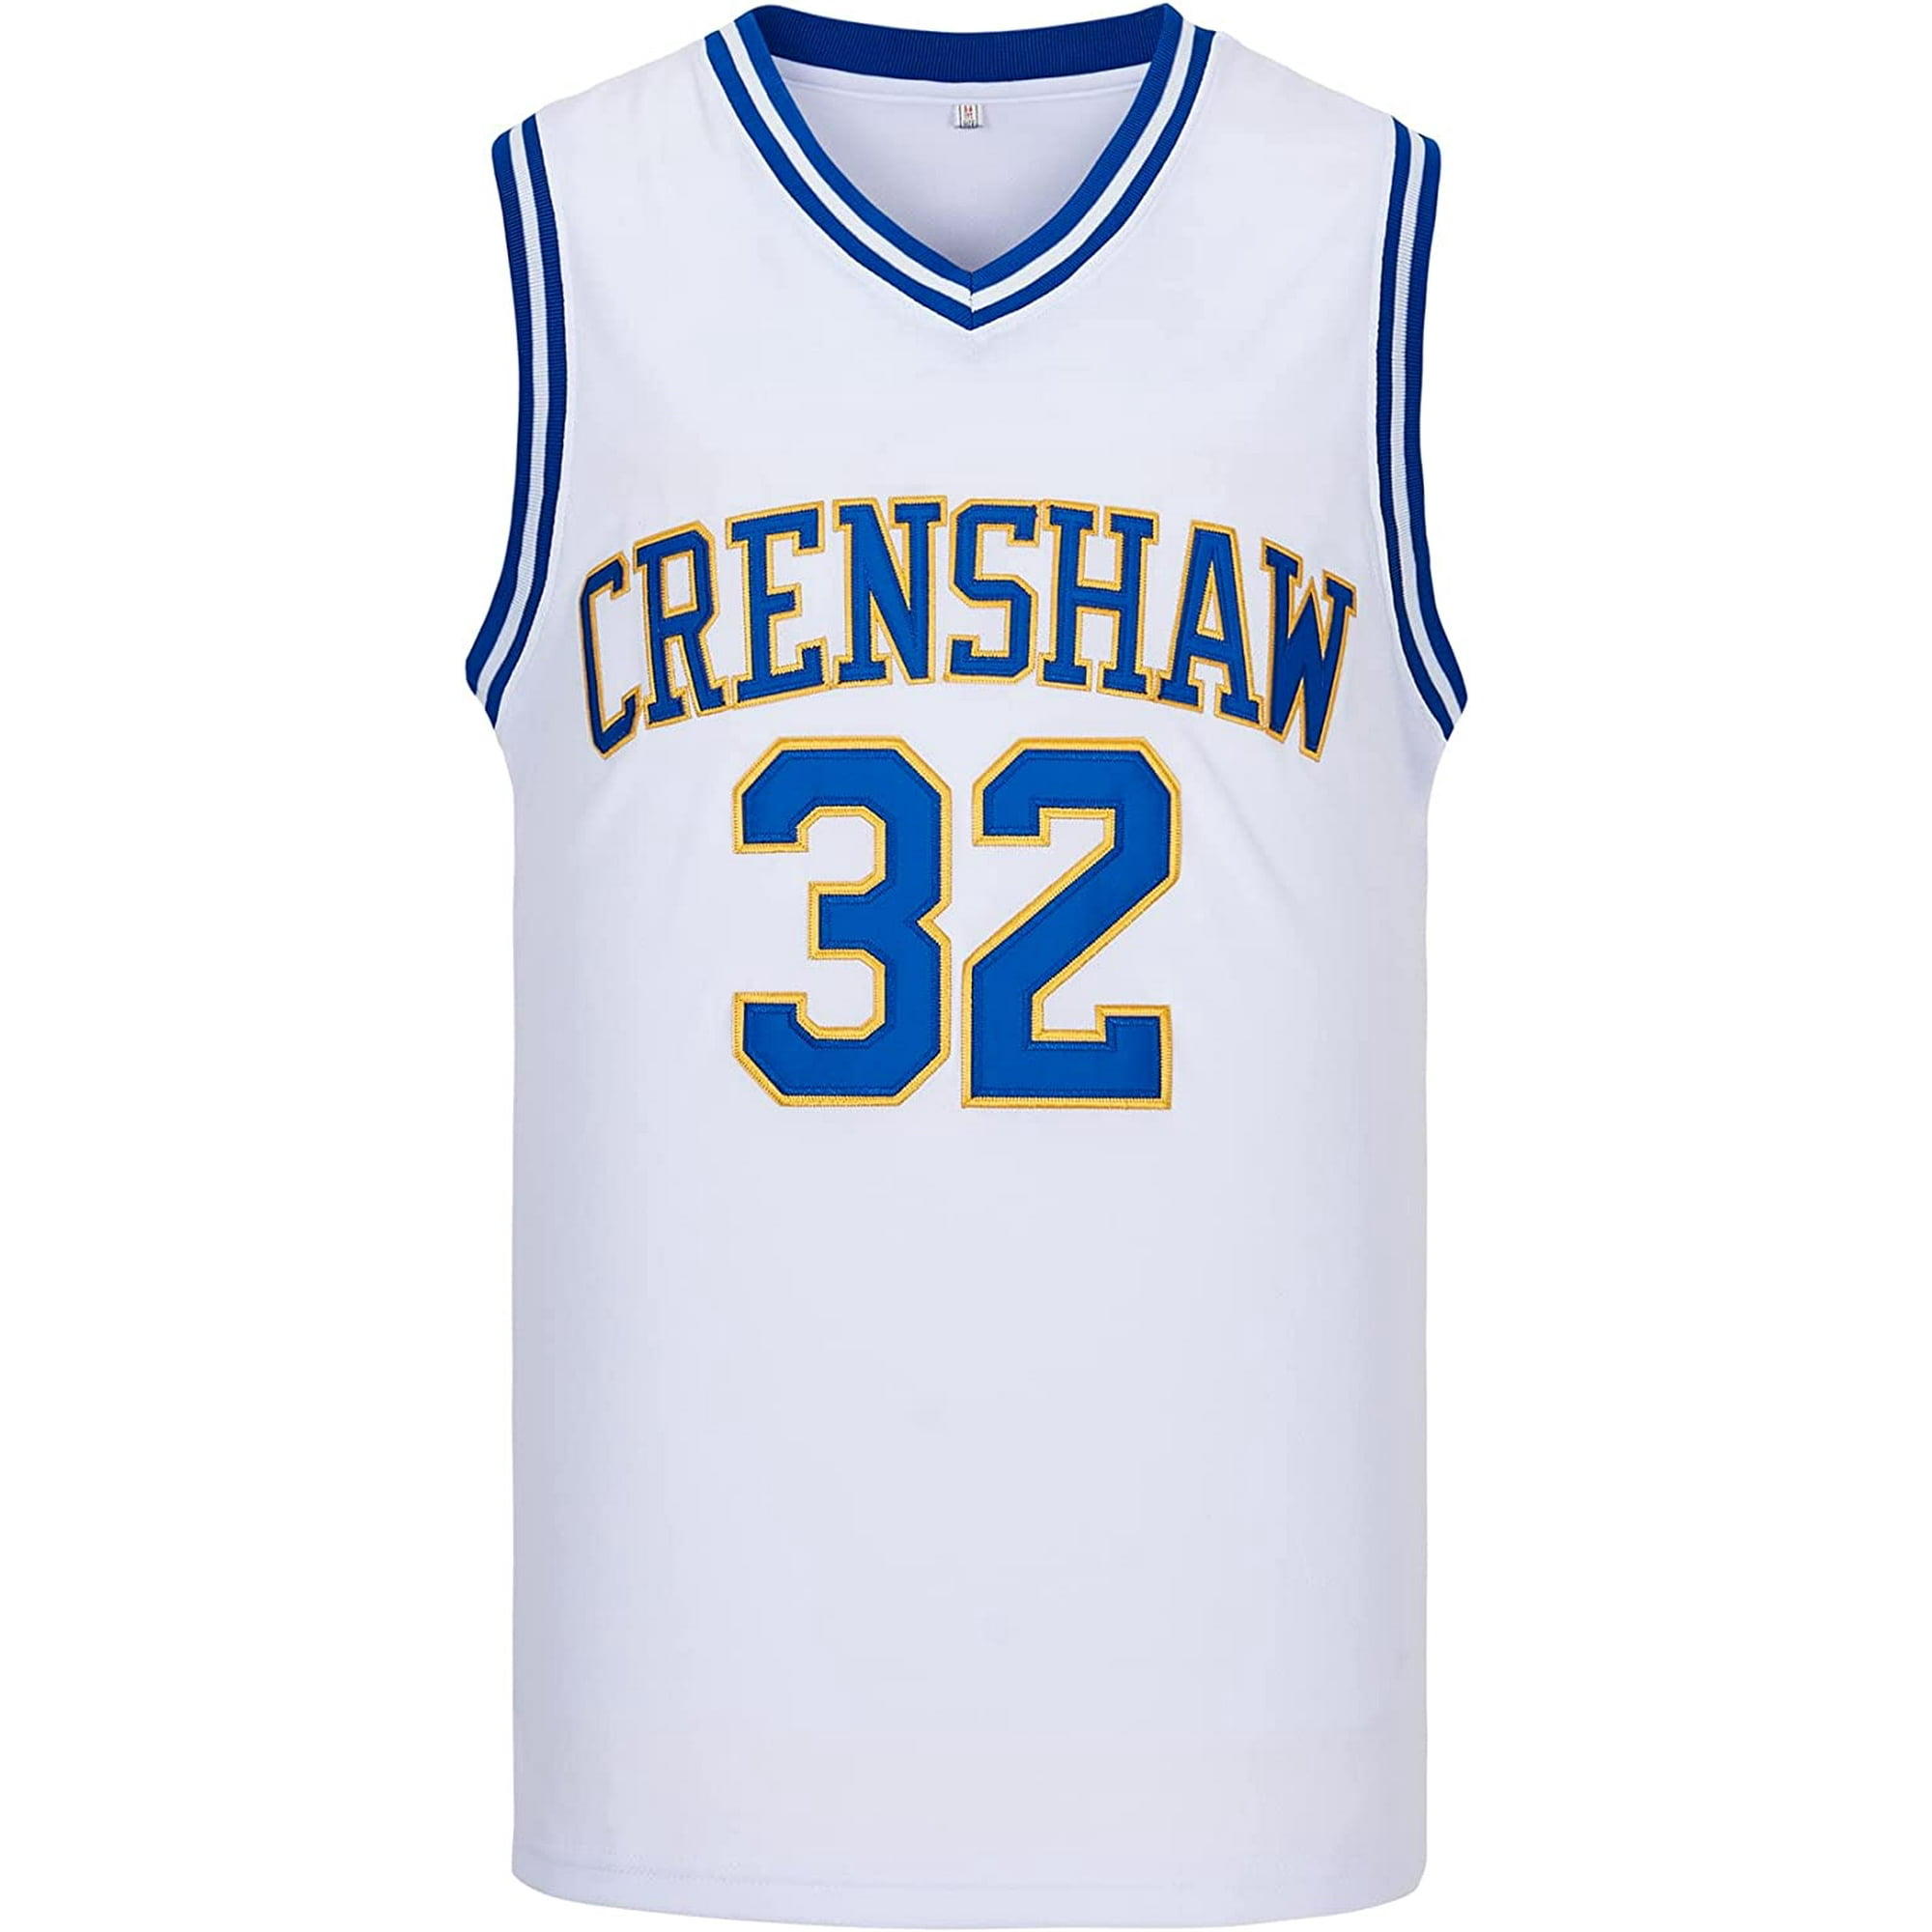 Youi-gifts McCall #22 Wright #32 Love and Basketball Moive Crenshaw Basketball Jersey, Adult Unisex, Size: Medium, Blue